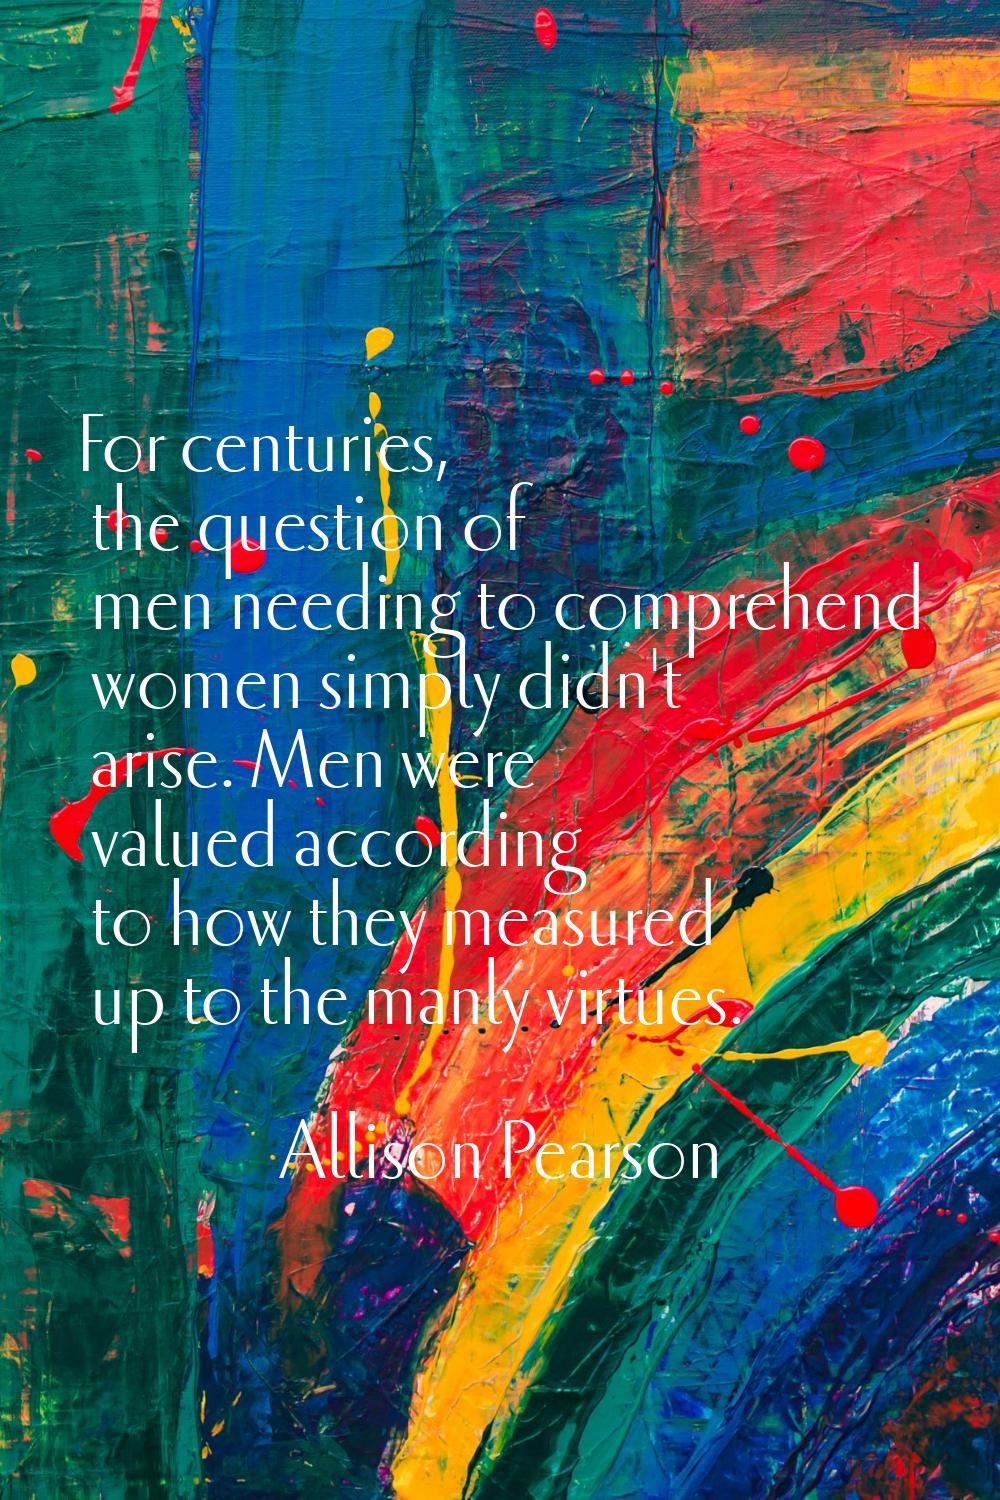 For centuries, the question of men needing to comprehend women simply didn't arise. Men were valued